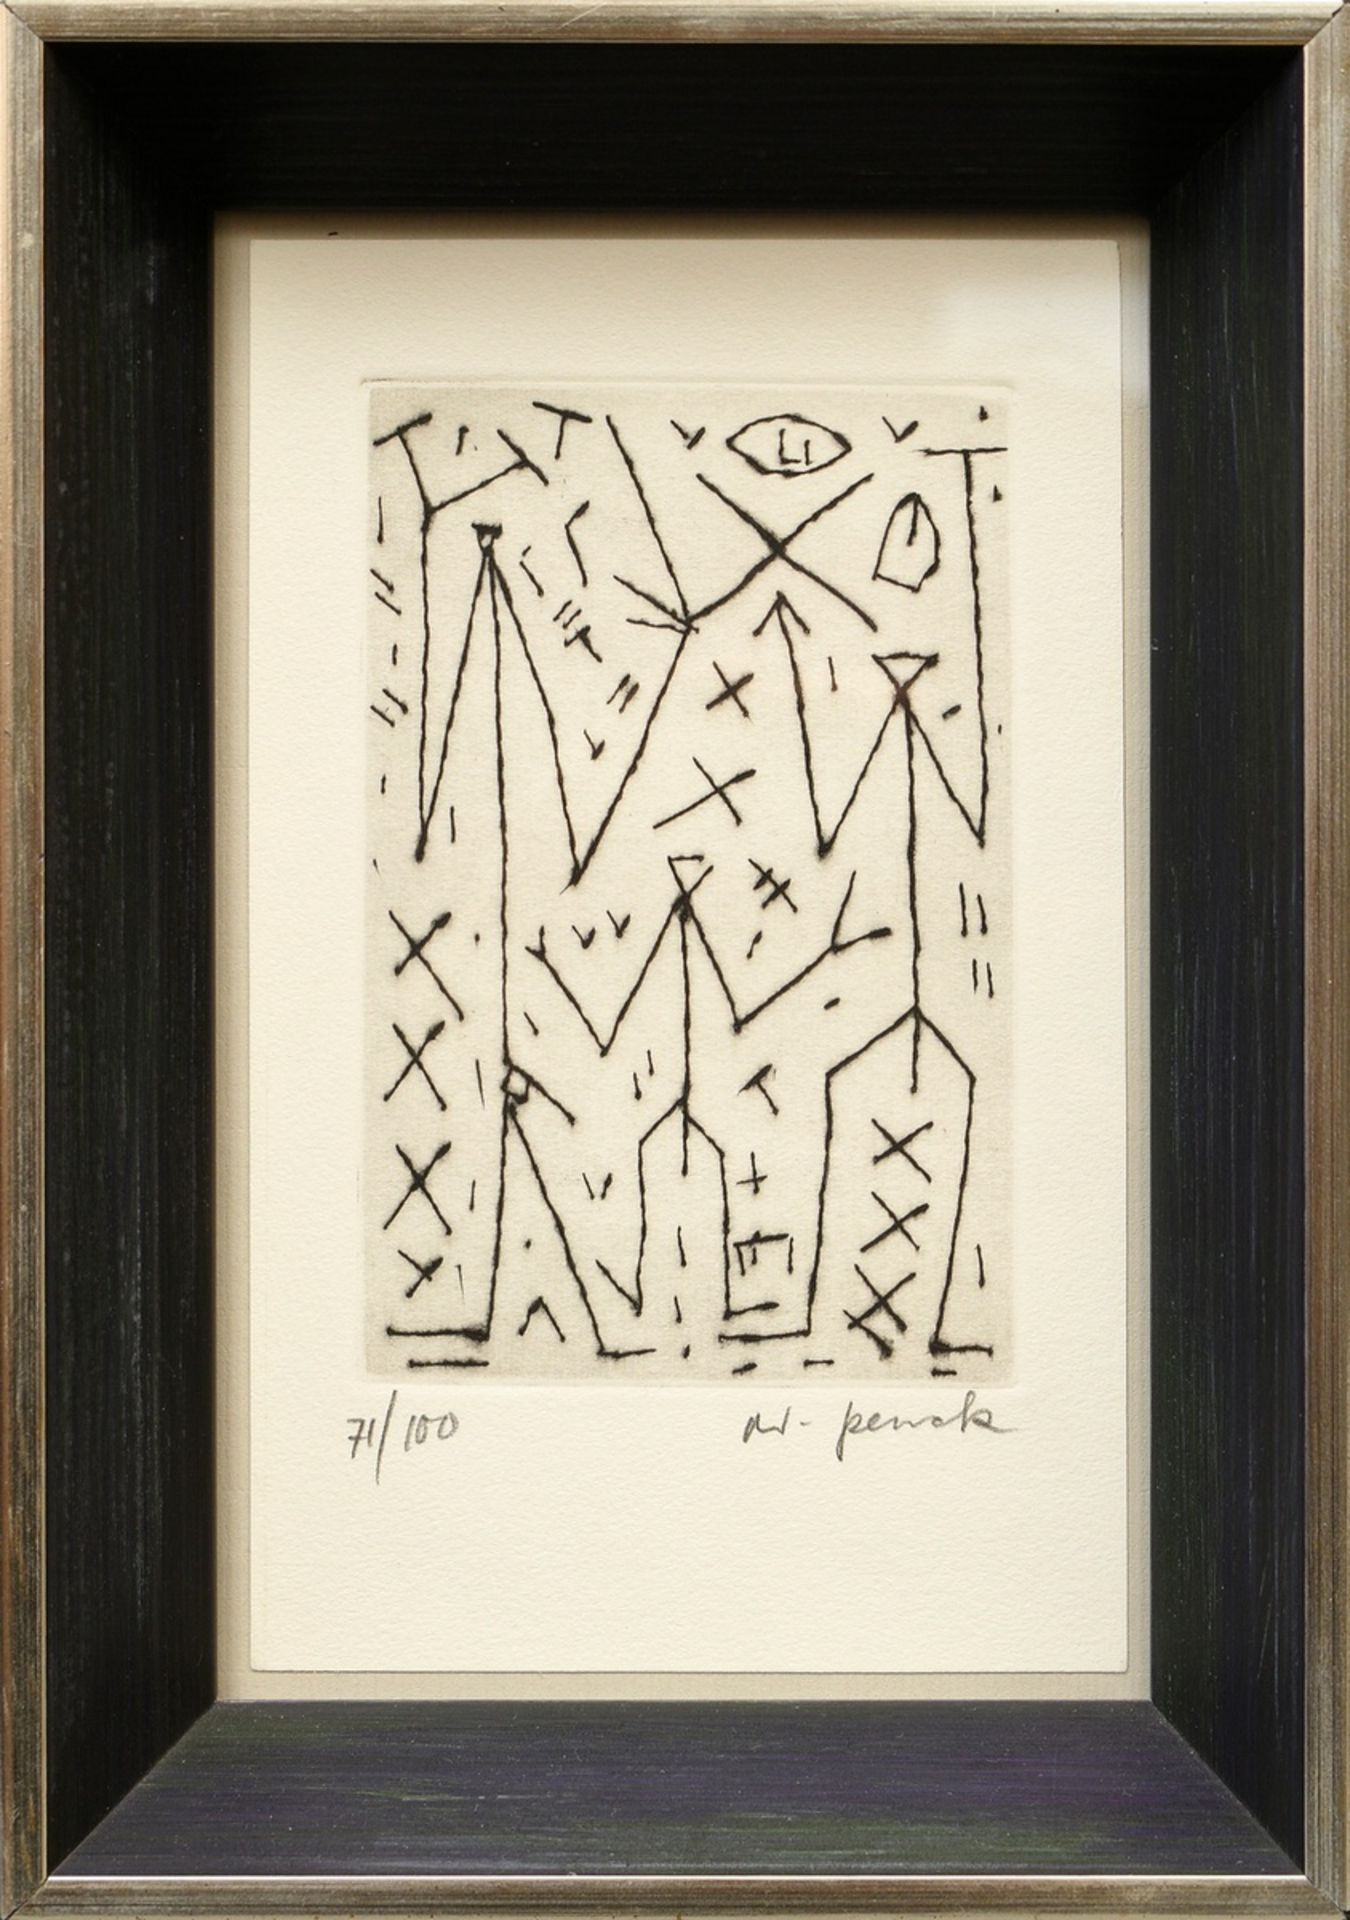 Penck, A.R. (1939-2017) 'Figures', etching, 71/100, sign. and num. below, PM 14.3x9.3cm, SM 21x12.5 - Image 2 of 4